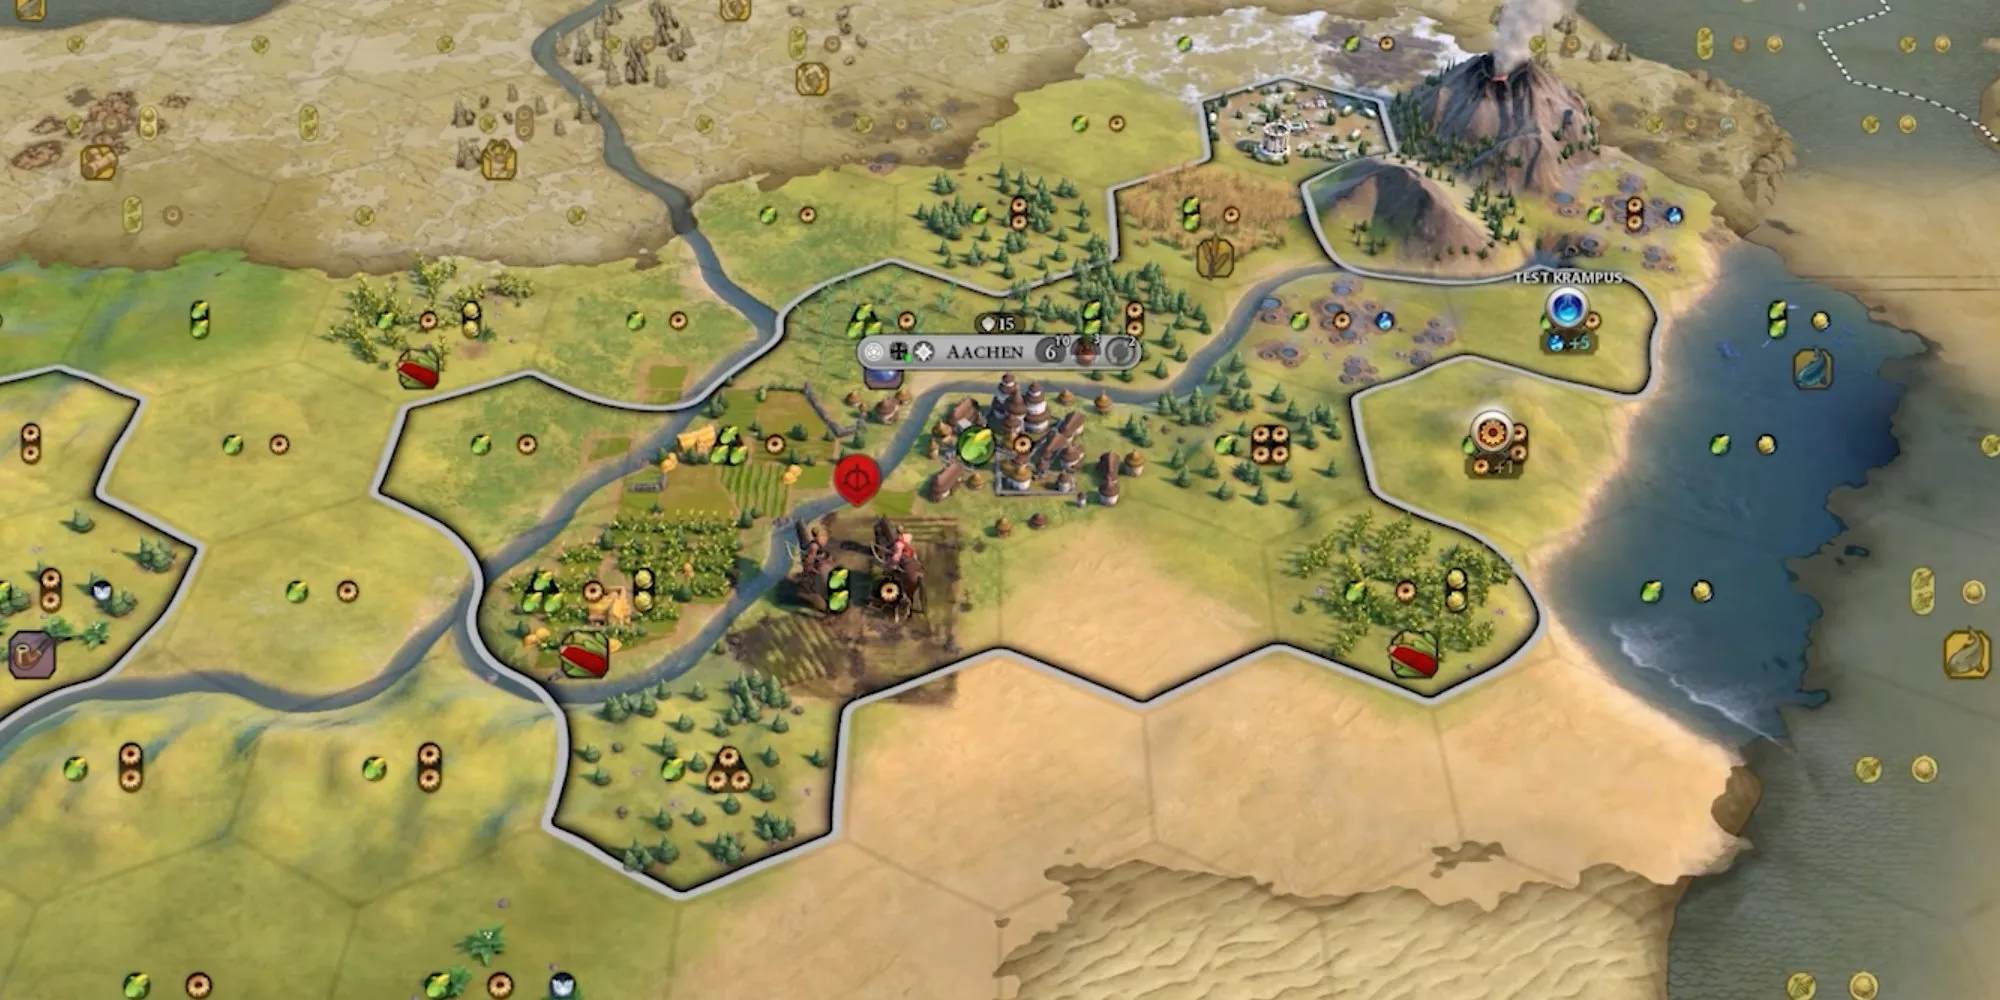 The German city Aachen being raided by barbarians in Civilization 6